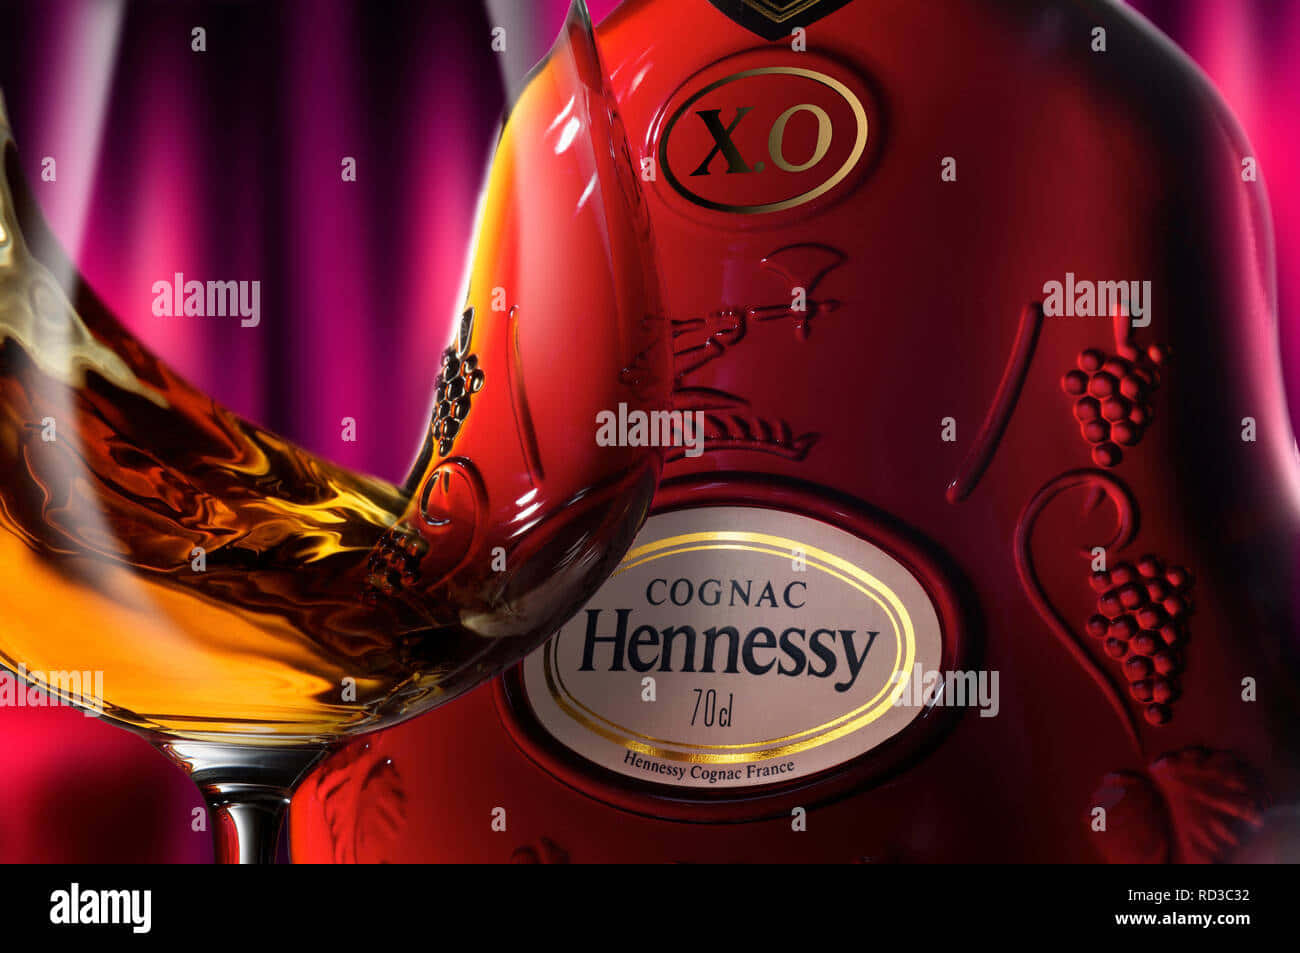 Clink Your Glass and Lift Your Spirits with Hennessy Wallpaper